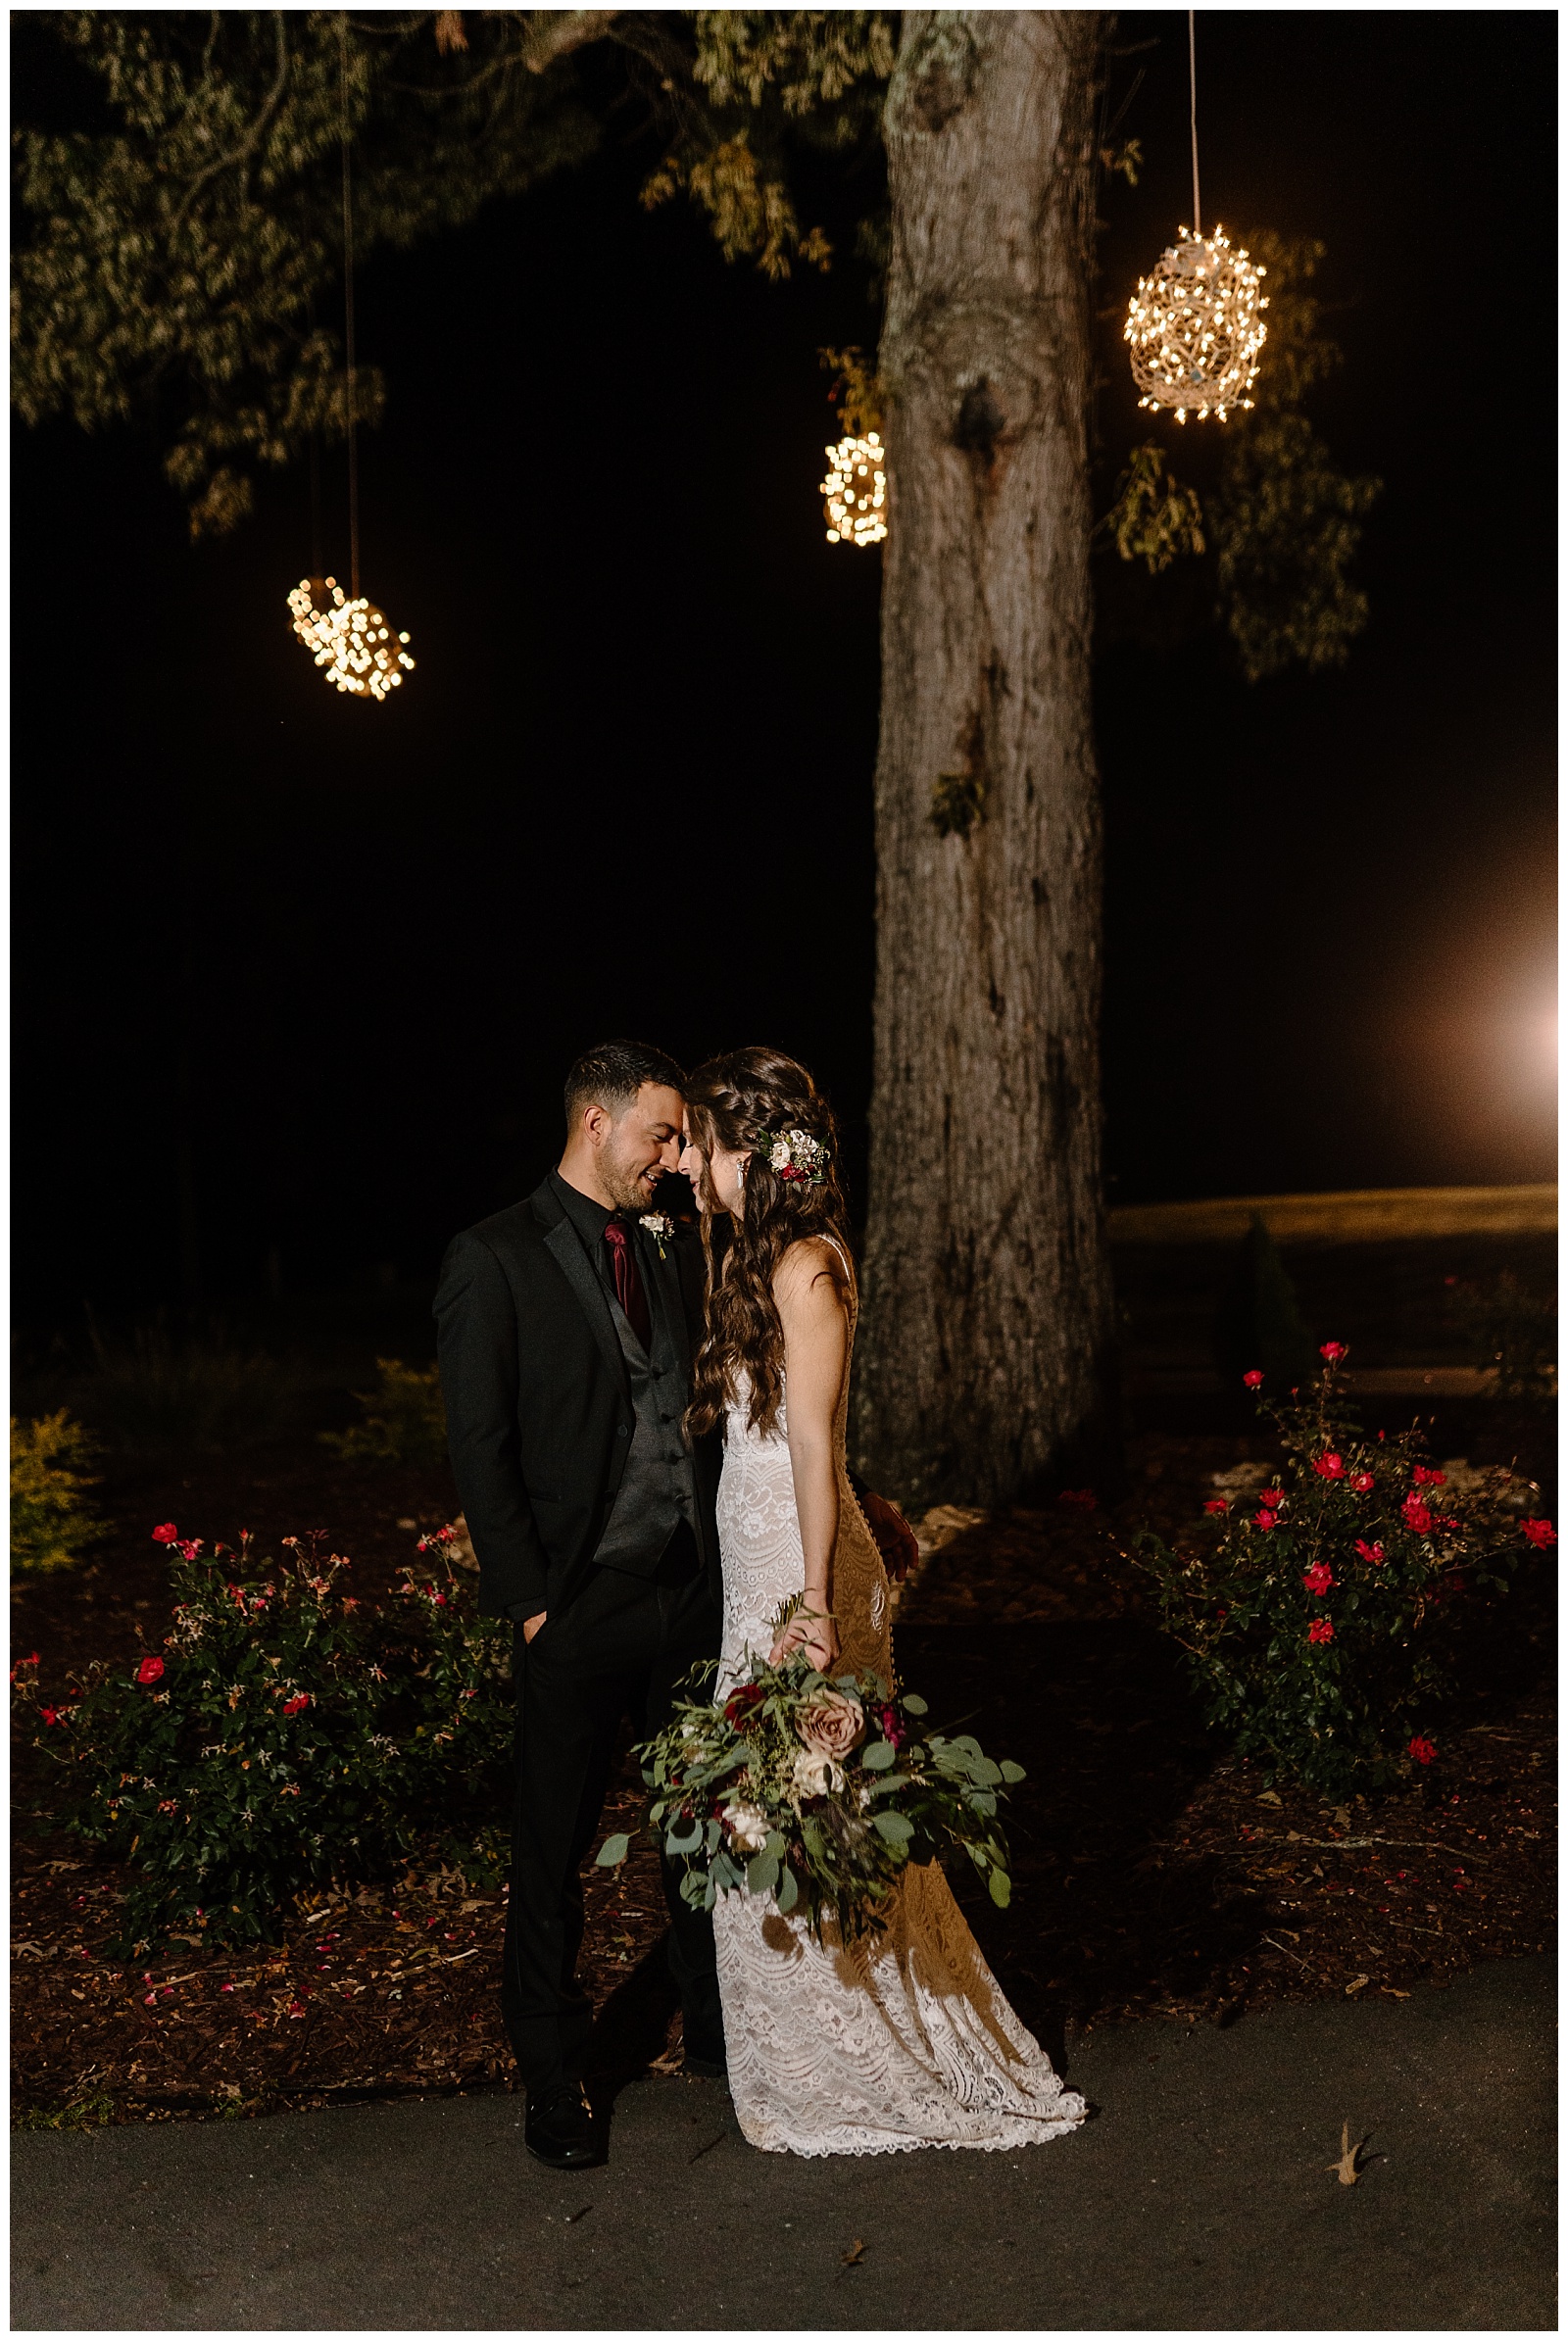 Night time portrait of groom in black suit and bride in lace dress looking at each other